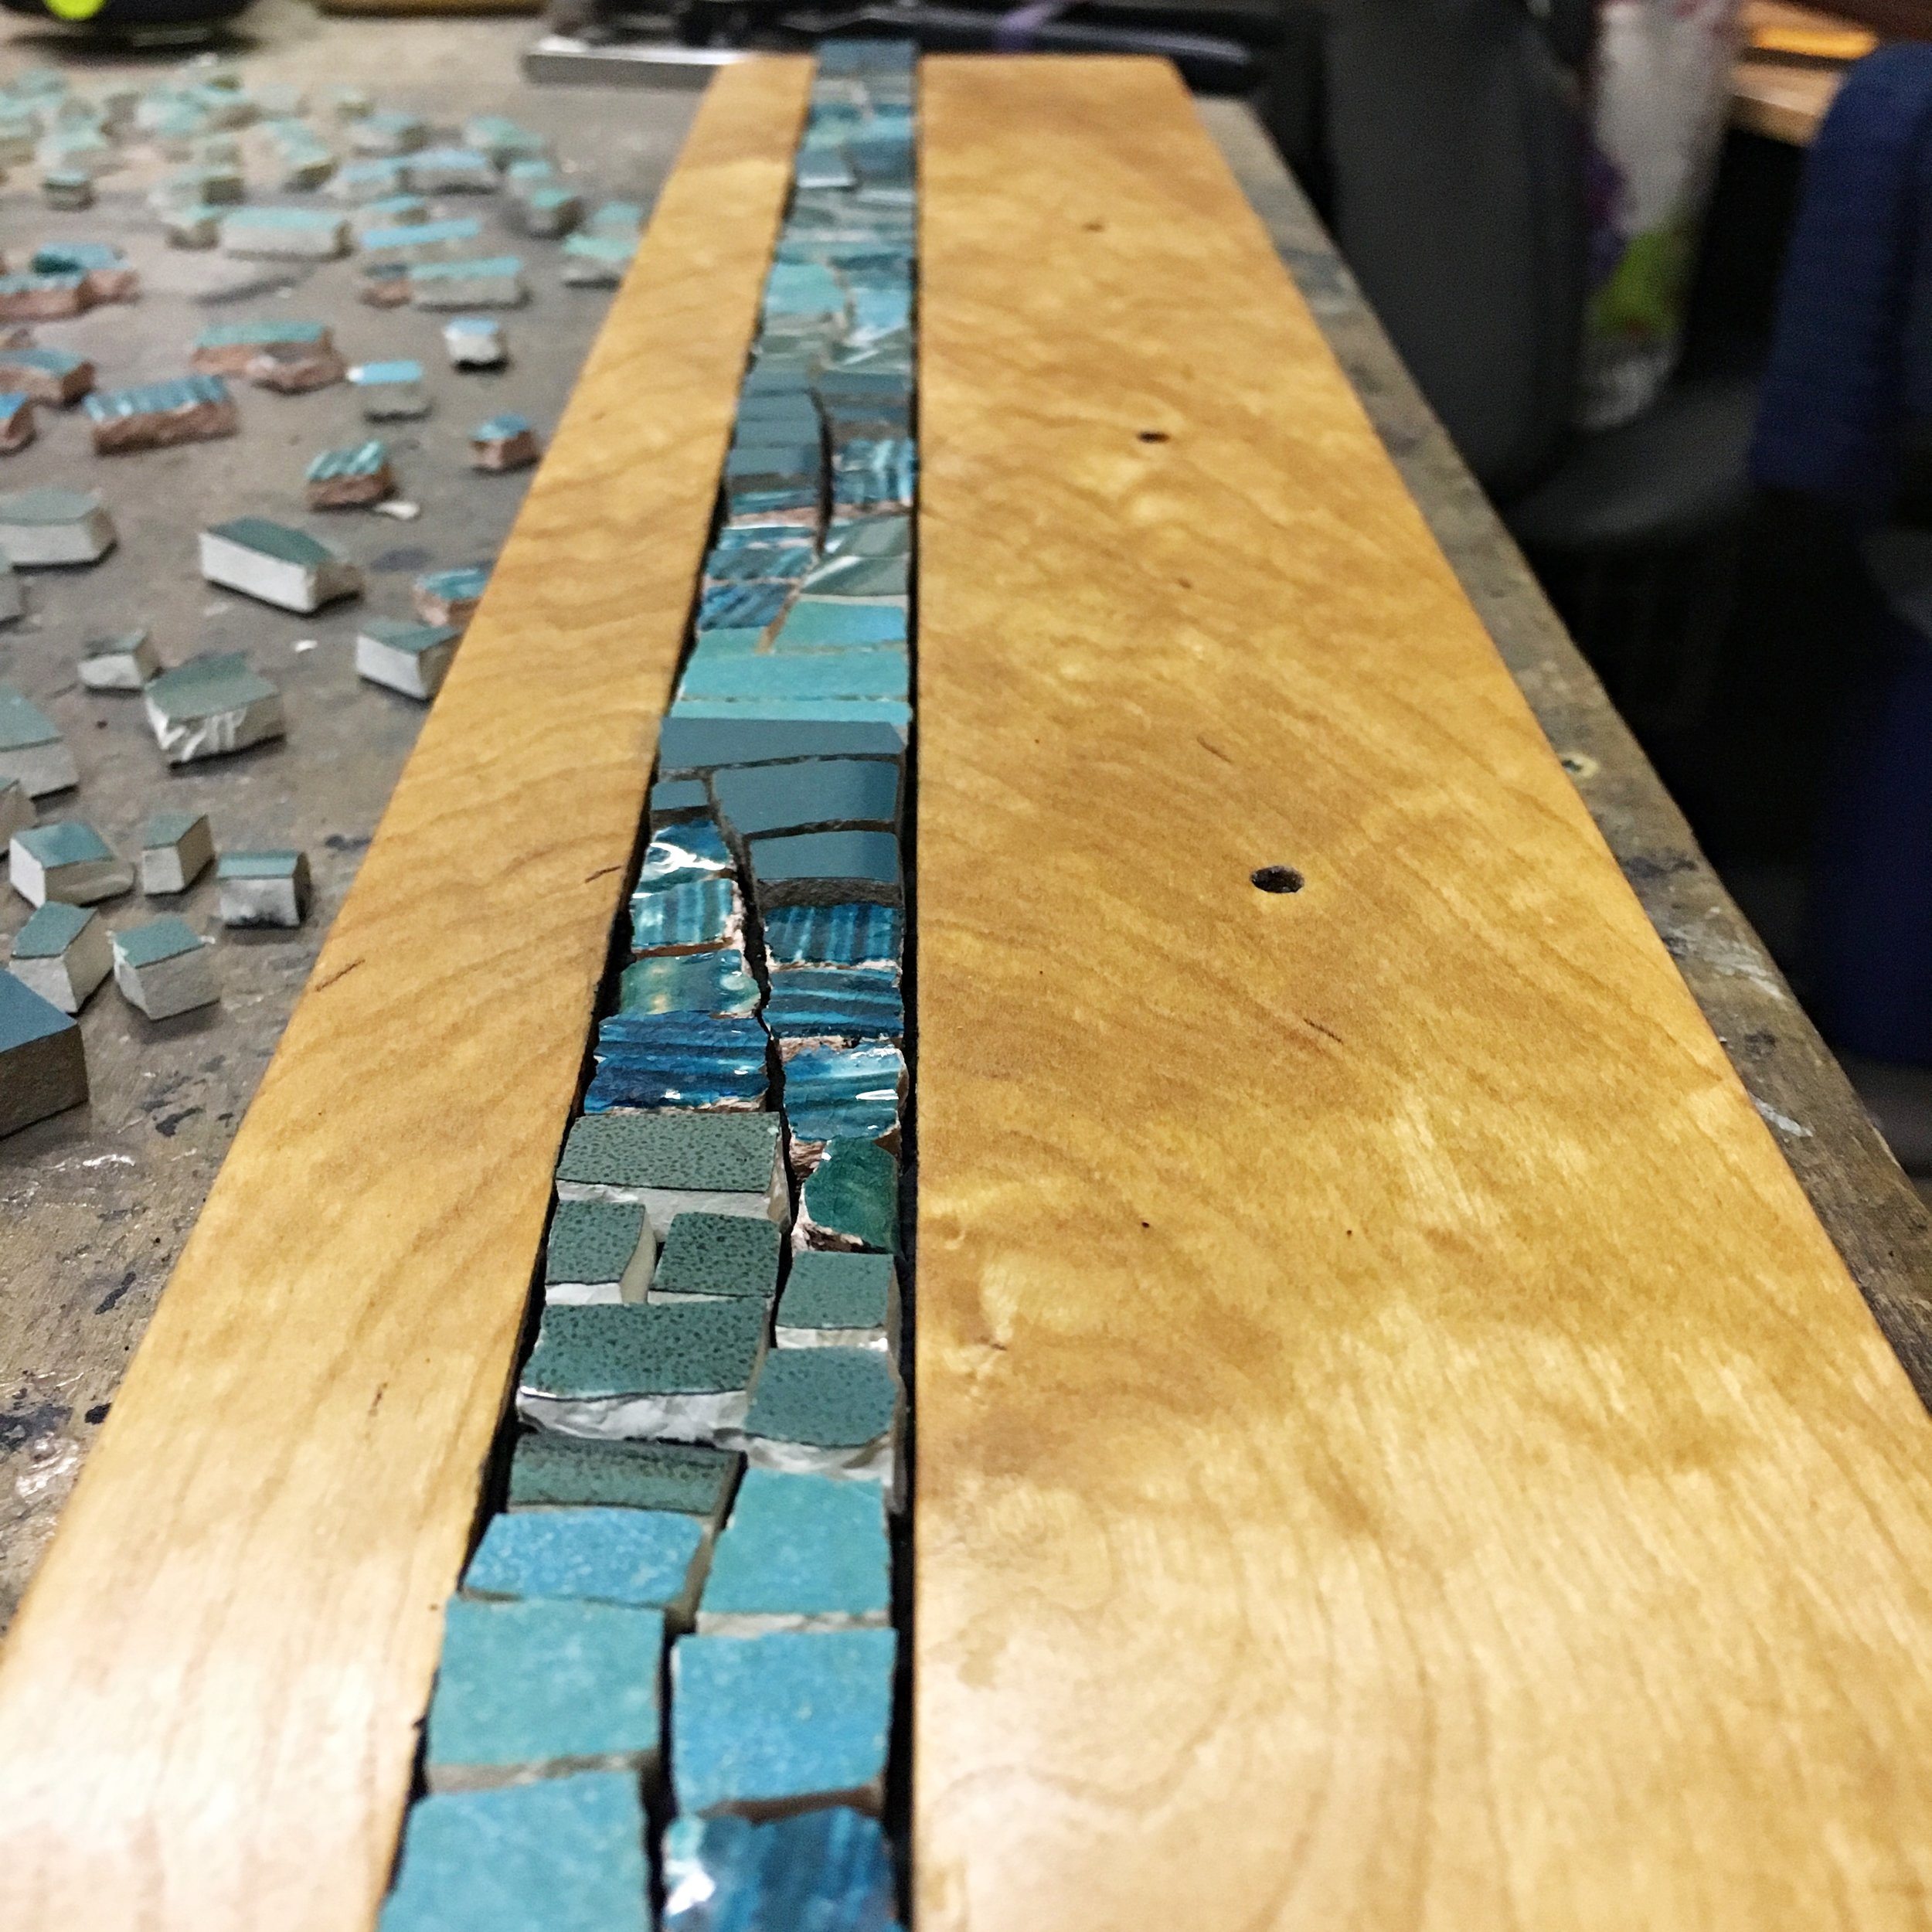 Teal mosaic in process